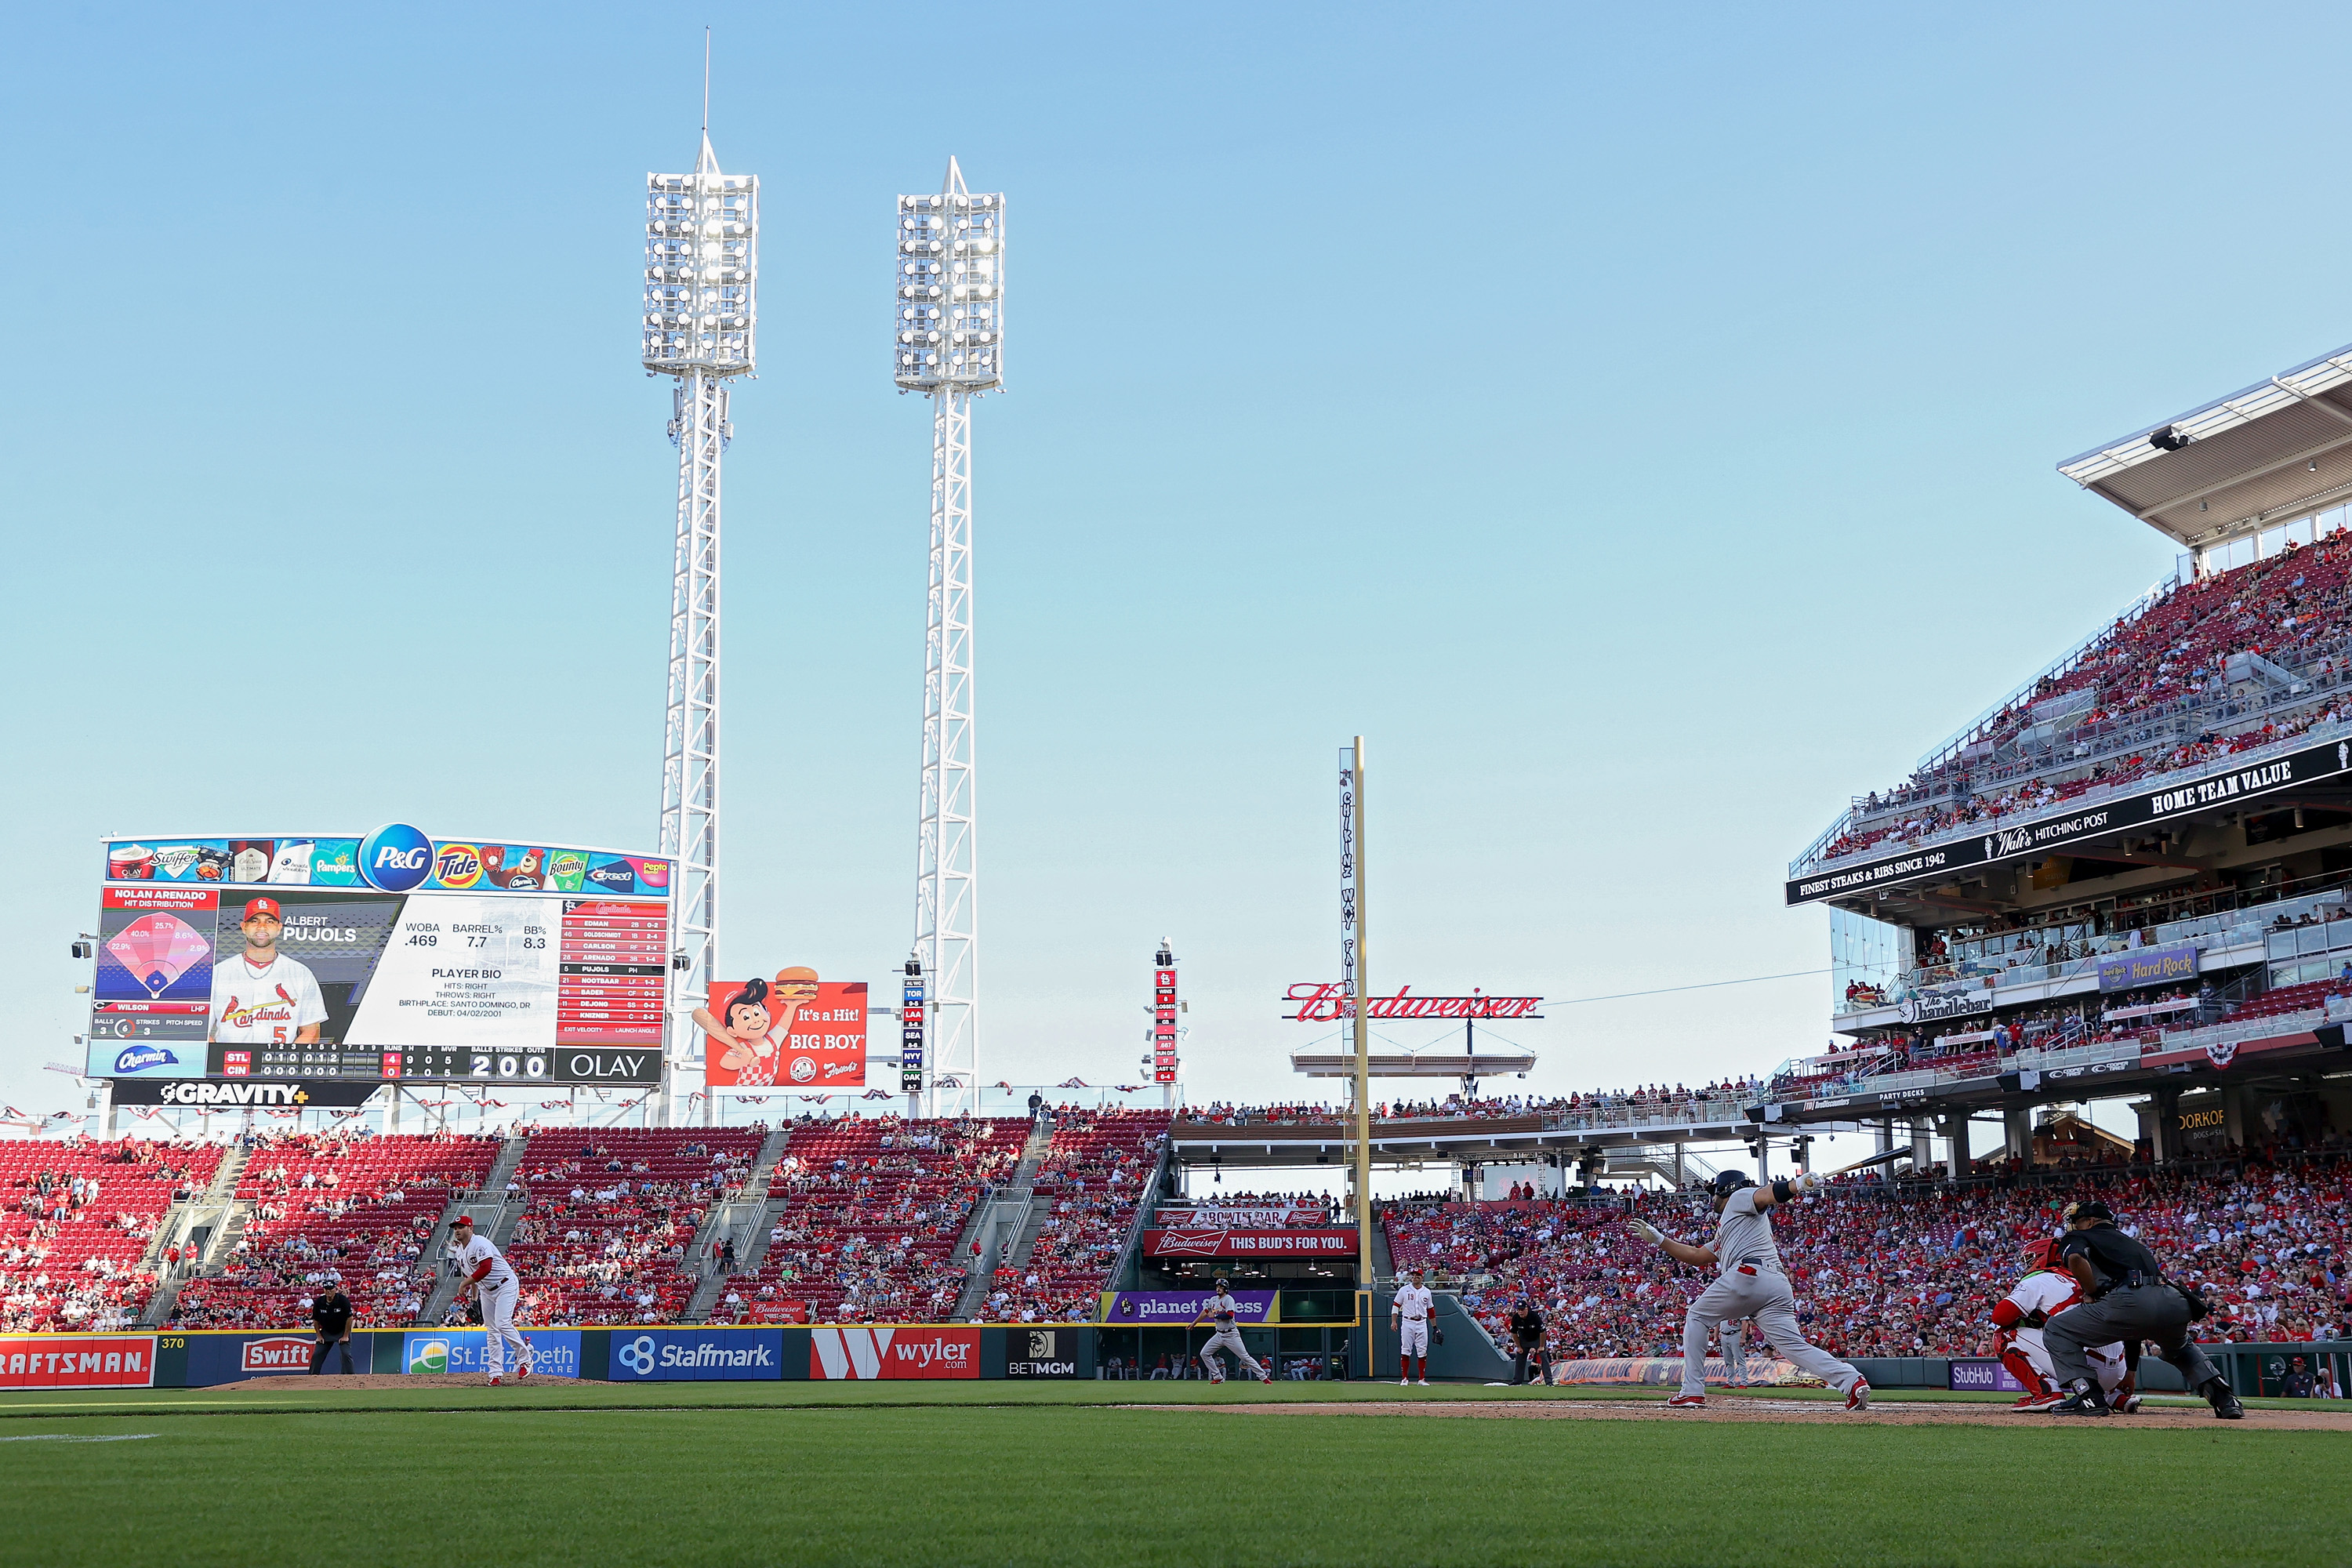 A round-the-bases tour of the Great American Ball Park's updates